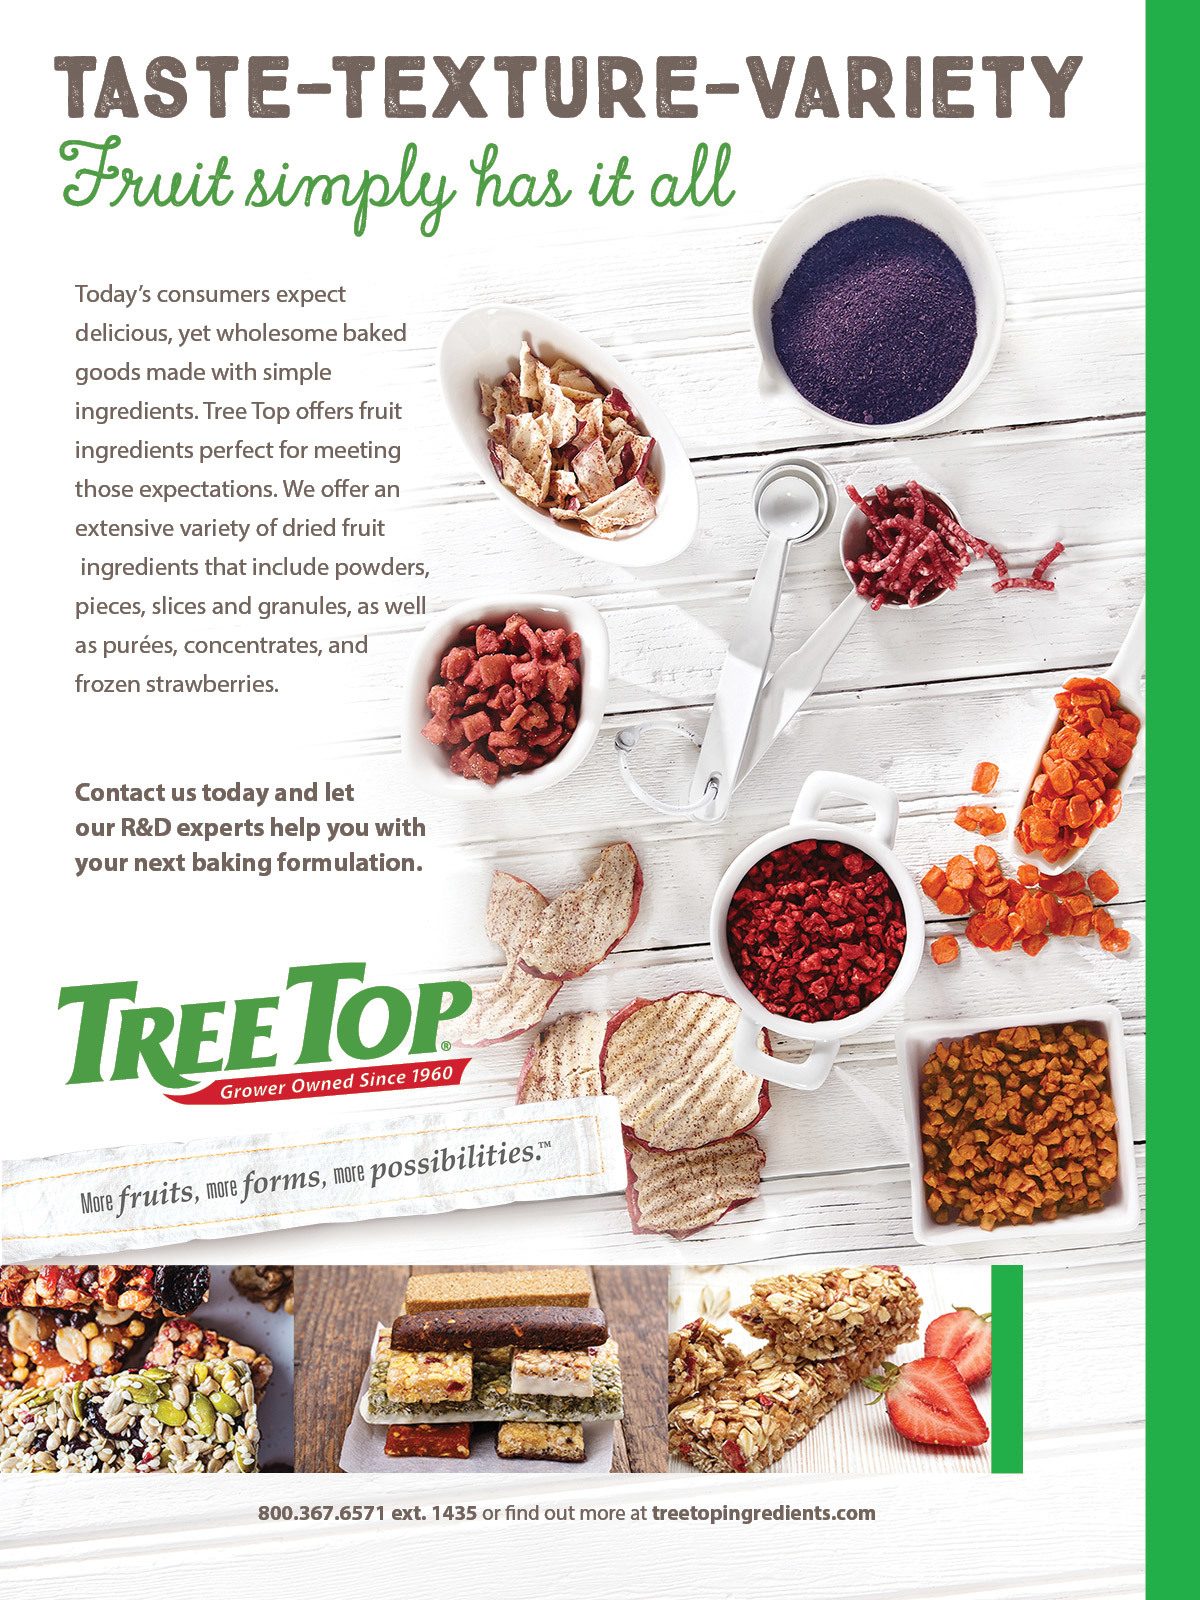 Advertisement, Full-page ad, Logo, Text, Photos of ingredients, Bowls